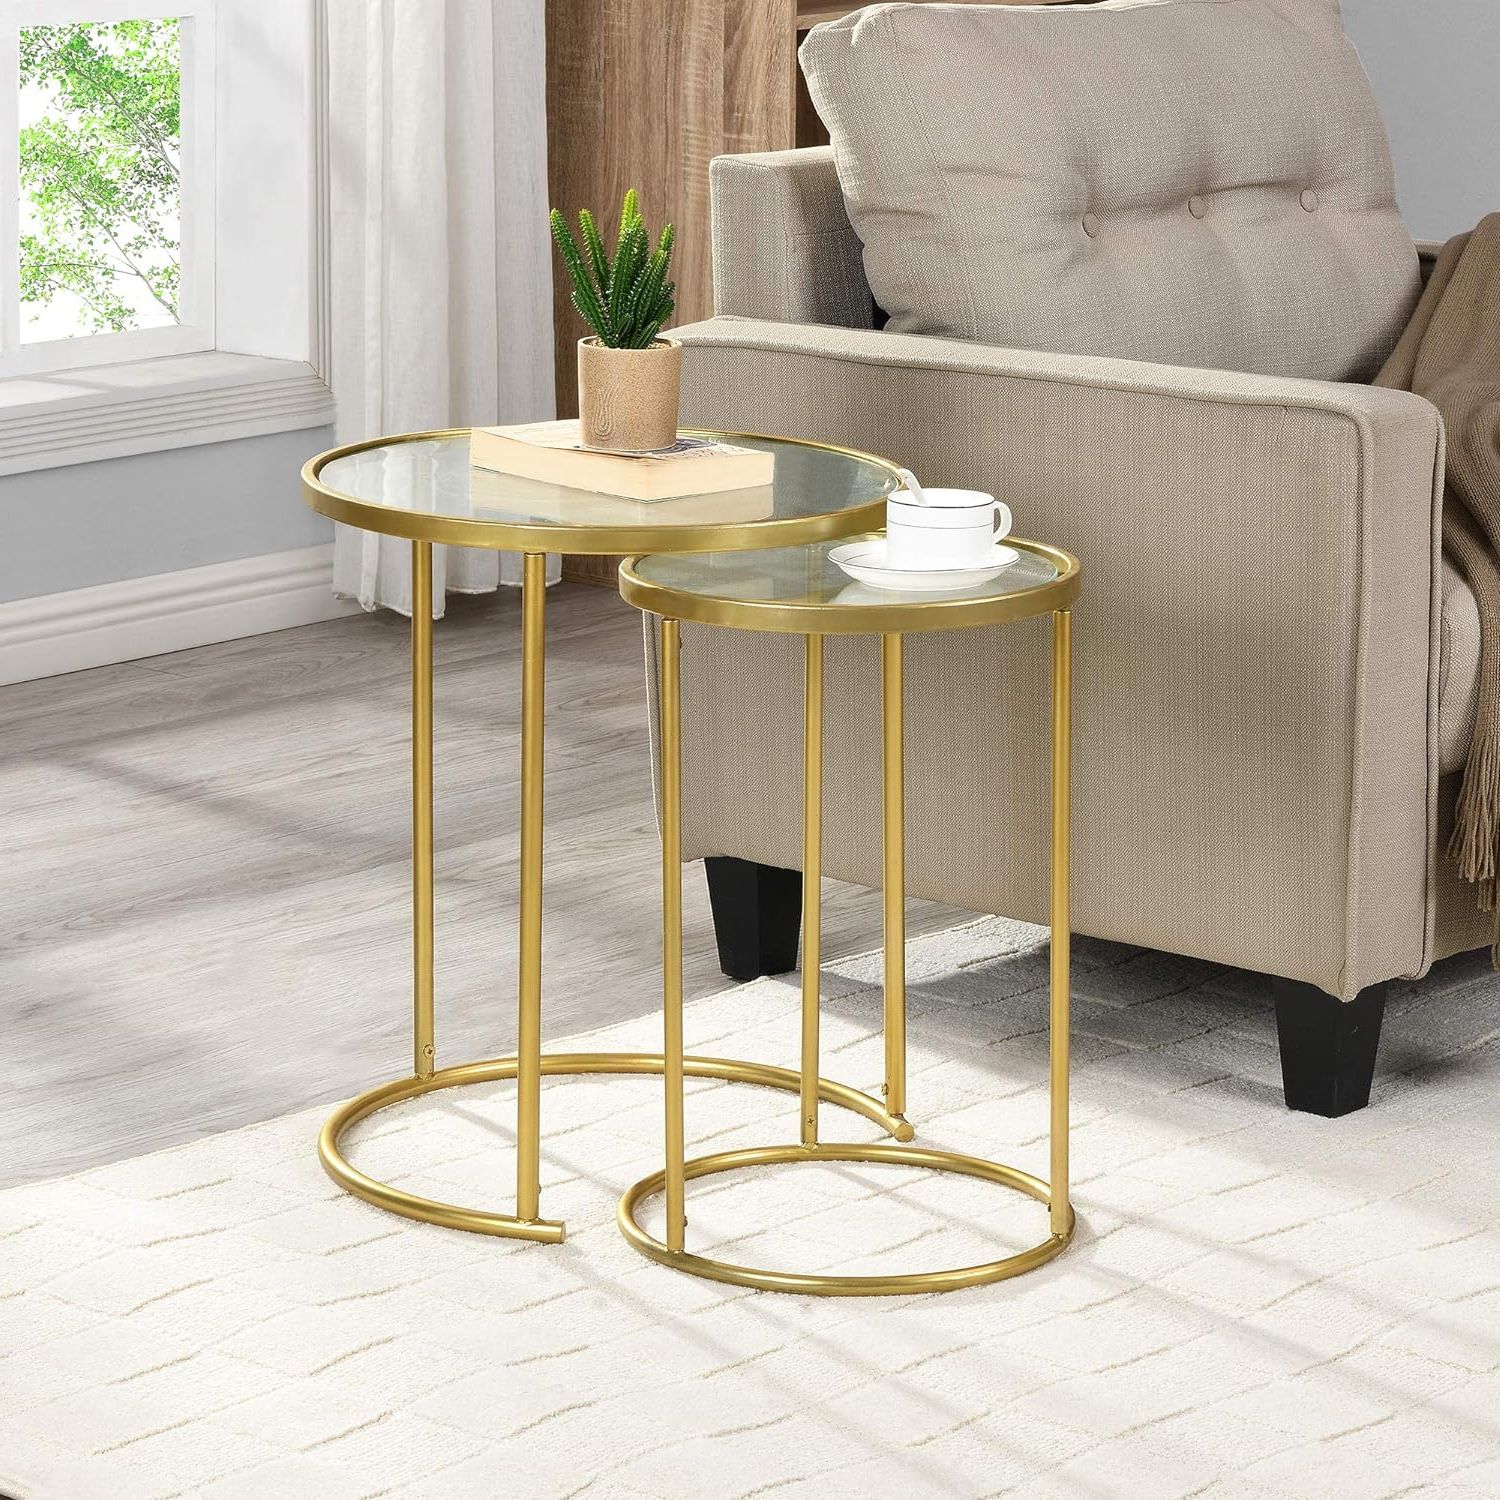 Most Current Homcom Round Coffee Tables Set Of 2, Gold Nesting Side End Tables With With Regard To Round Coffee Tables With Steel Frames (View 12 of 15)